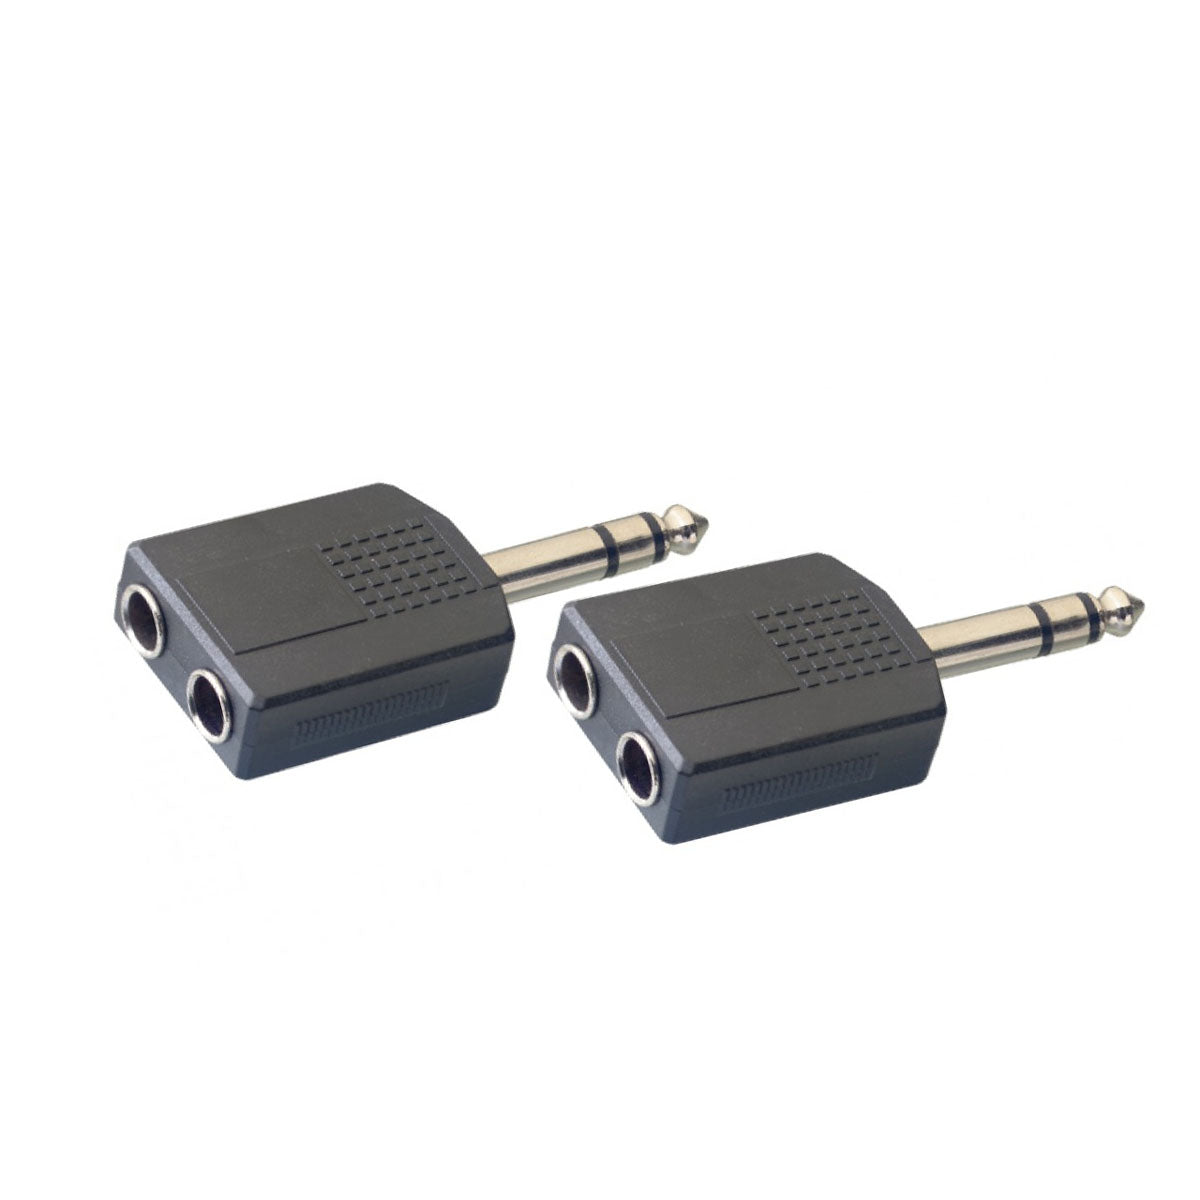 Stagg Audio Adapters - 2 1/4" Jack Sockets To Stereo 1/4" Jack (Pack of 2)